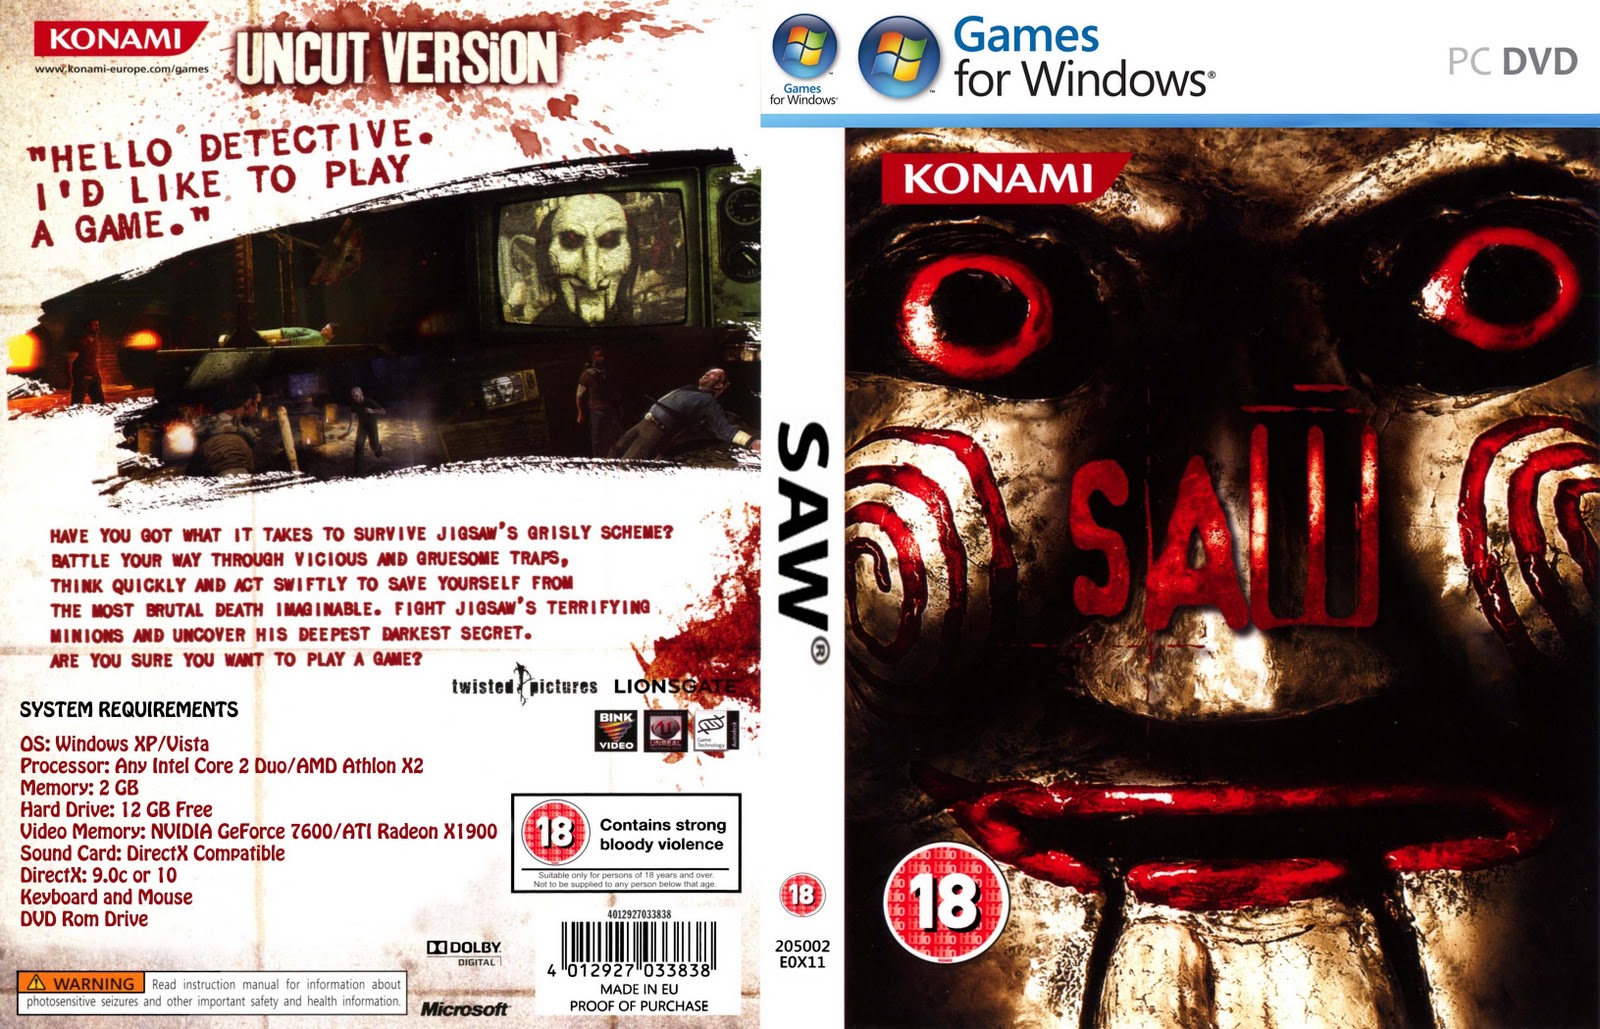 saw_the_video_game_2009_pc_dvd-front.jpg